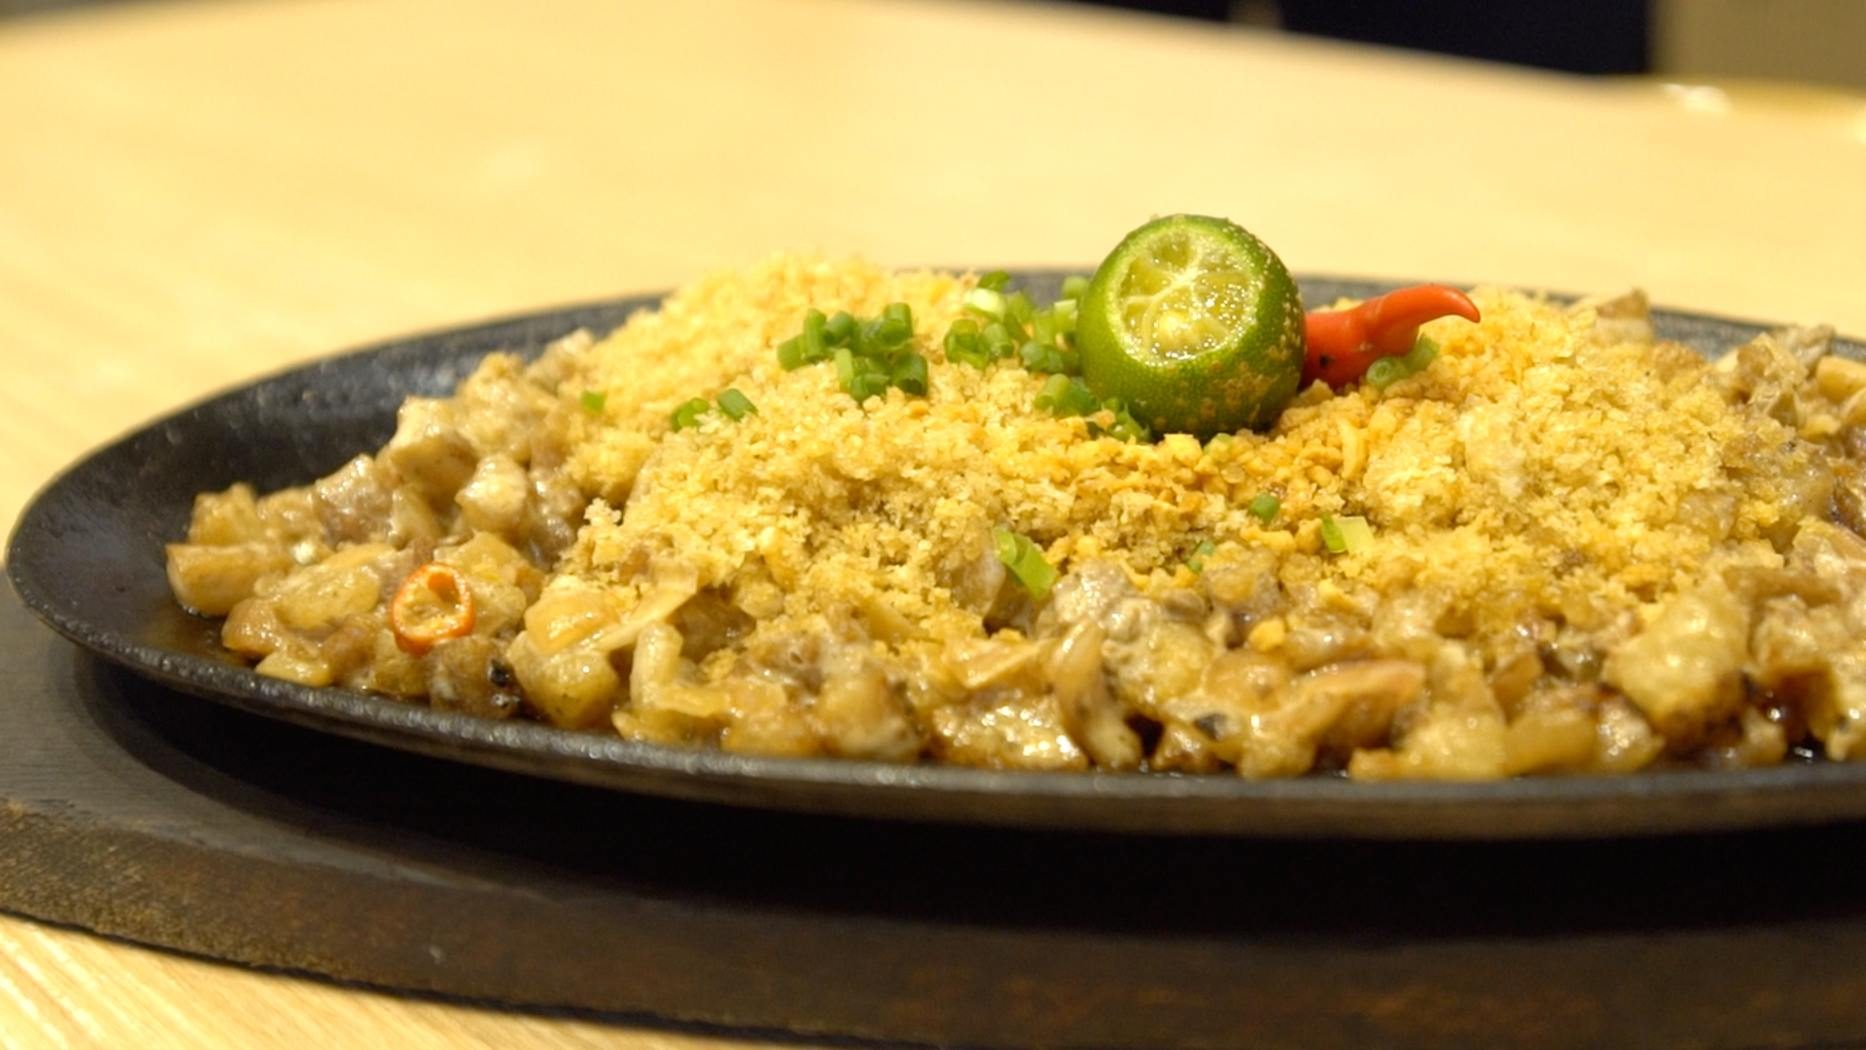 WATCH: How Manam’s House Crispy Sisig is made